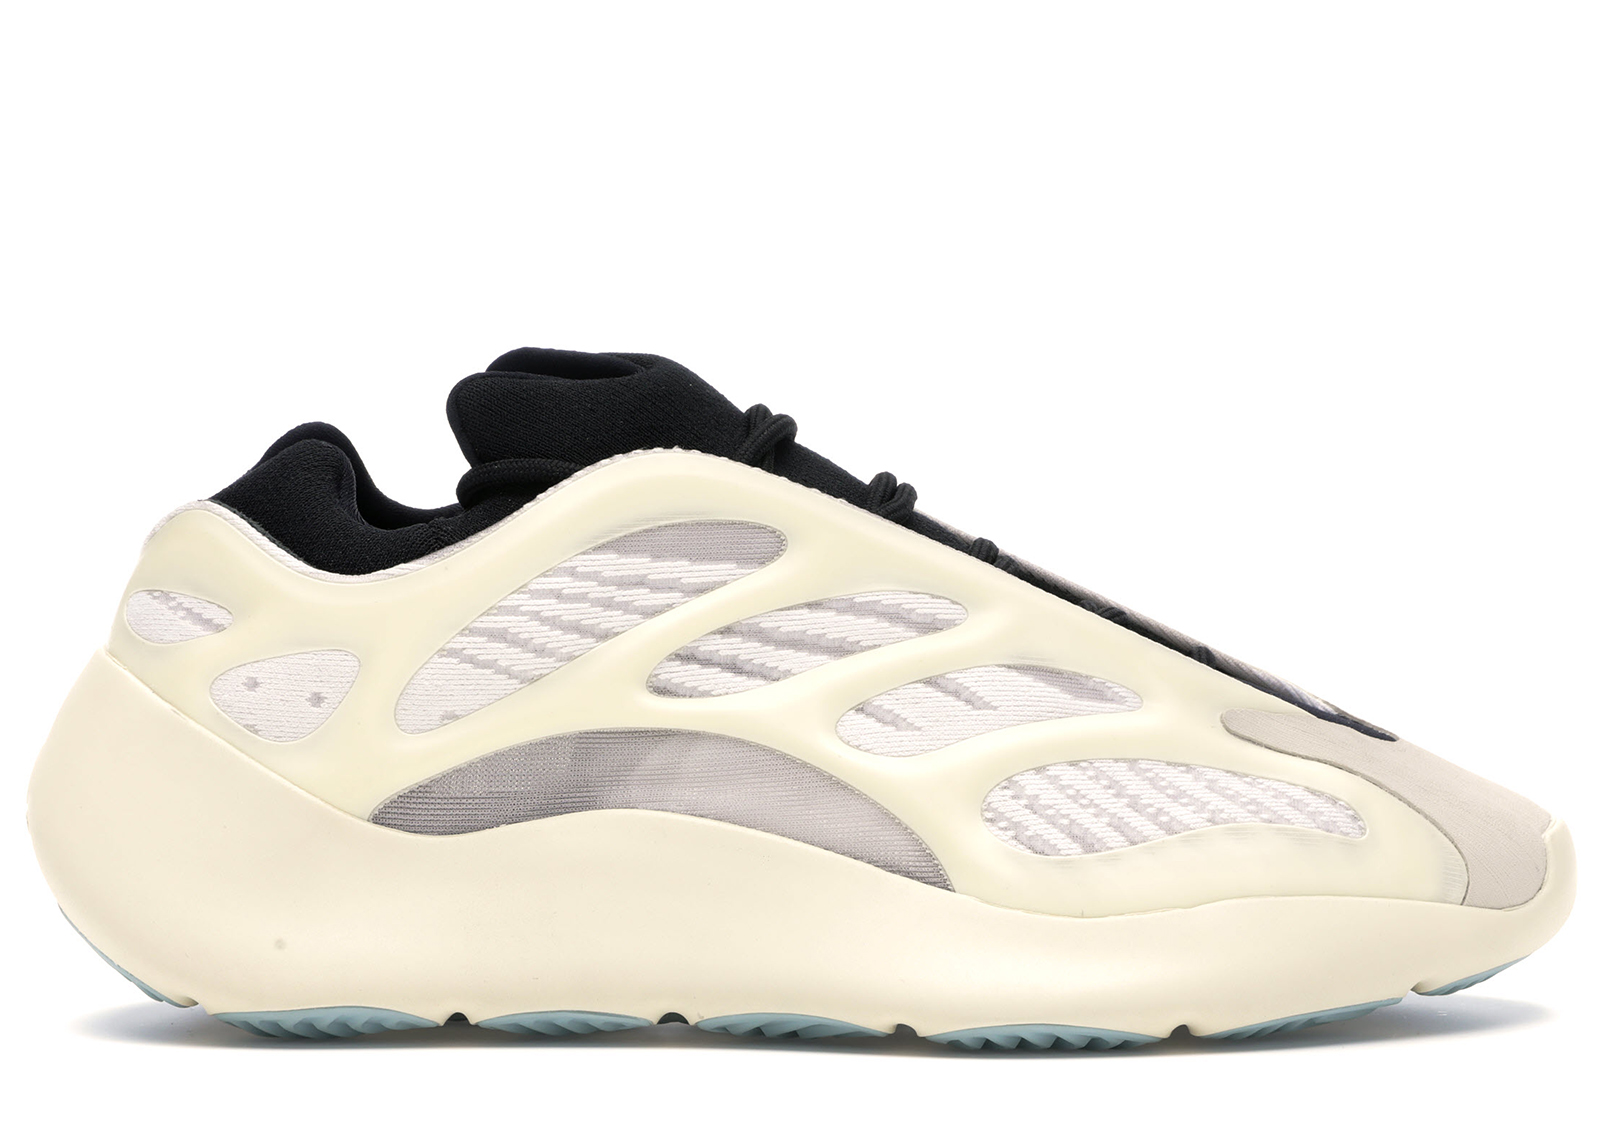 adidas yeezy boost 700 Archives - Merkis.com.bd